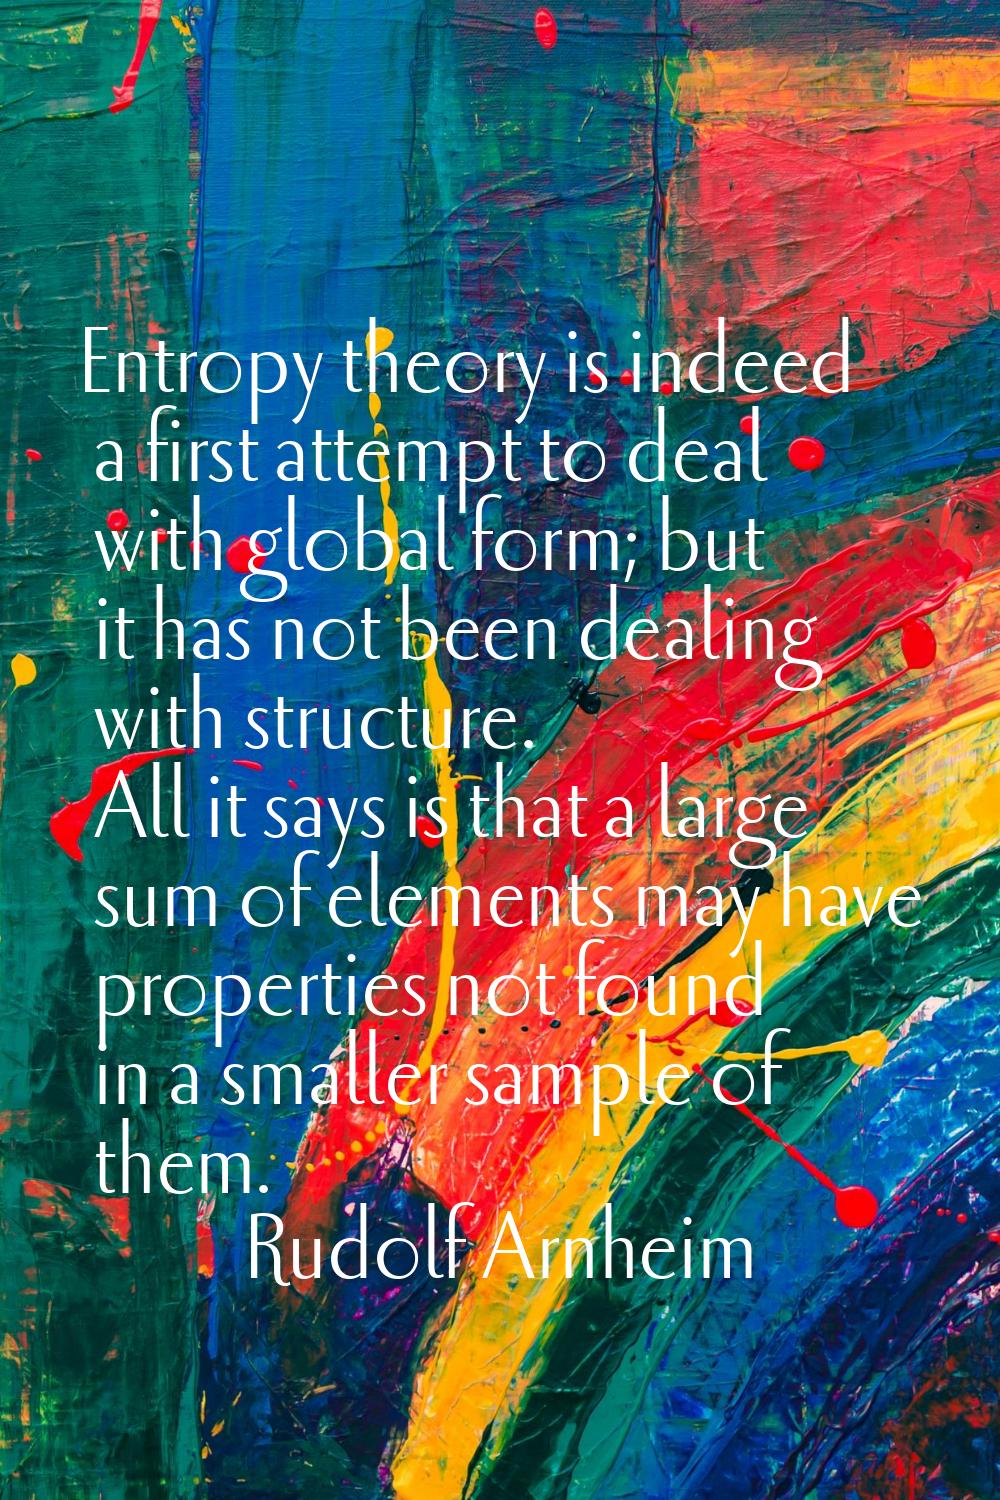 Entropy theory is indeed a first attempt to deal with global form; but it has not been dealing with